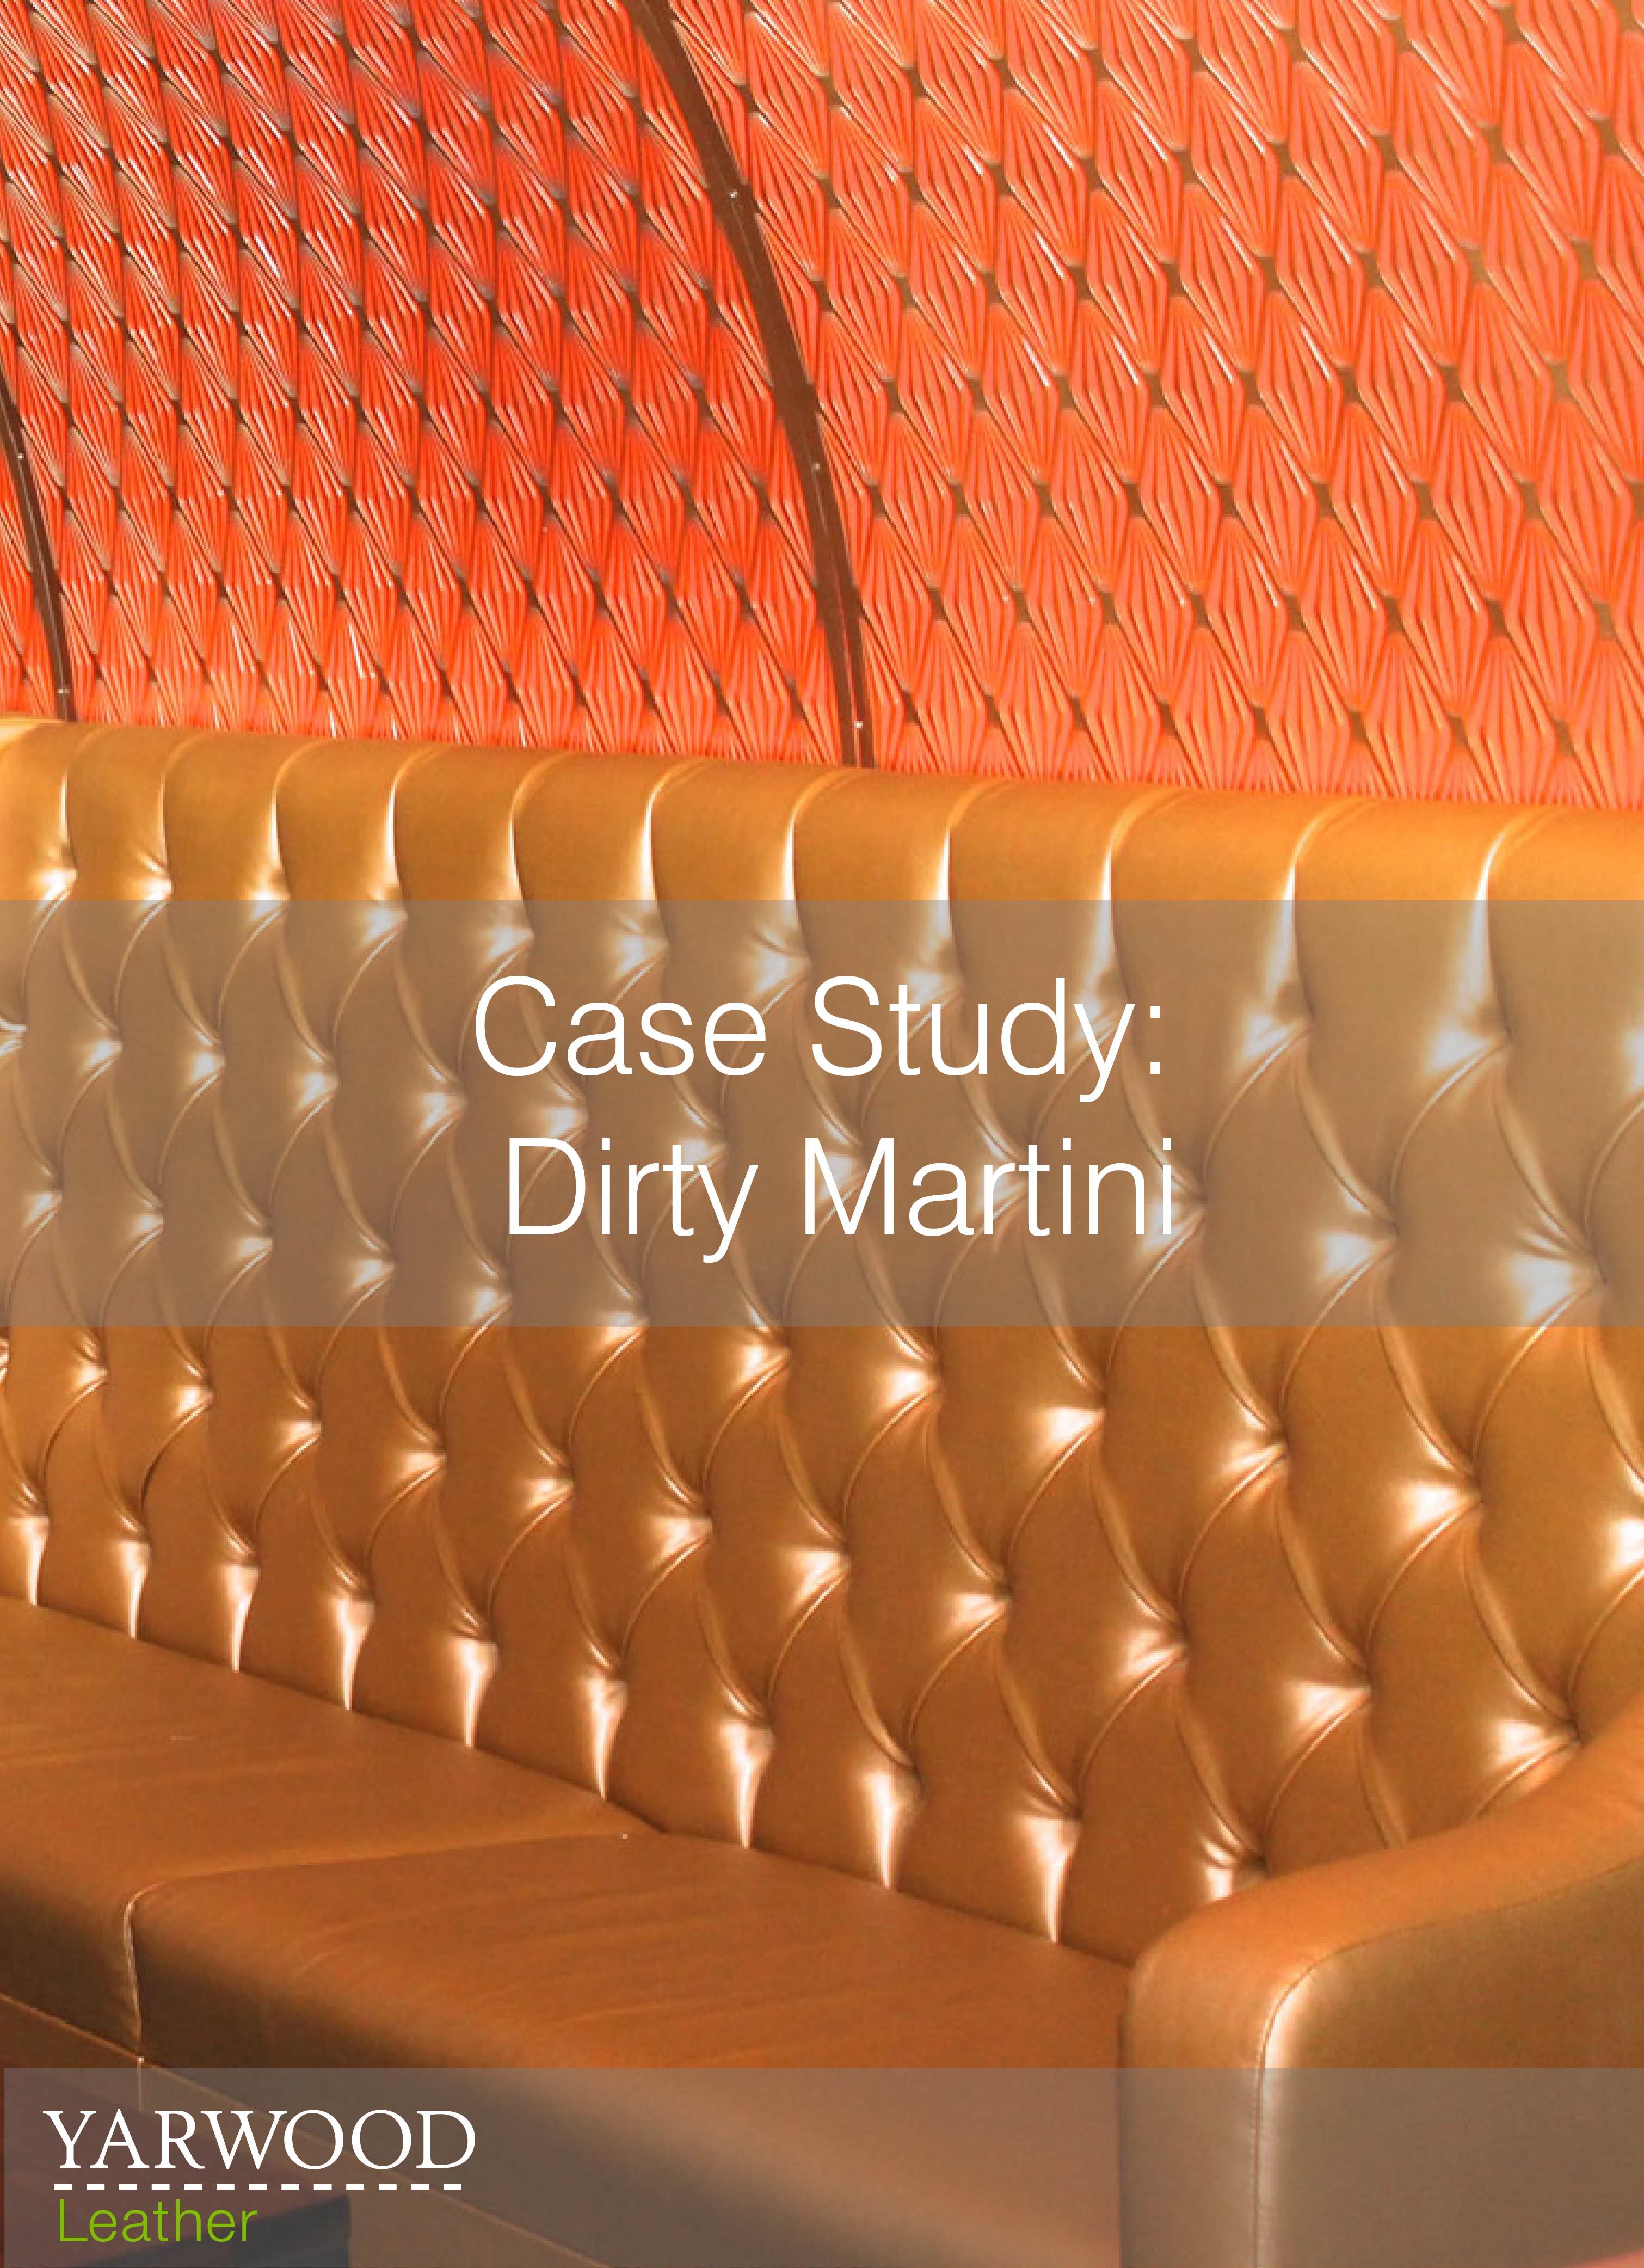 Bespoke martinis and metallic seating, read about our work with Dirty Martini